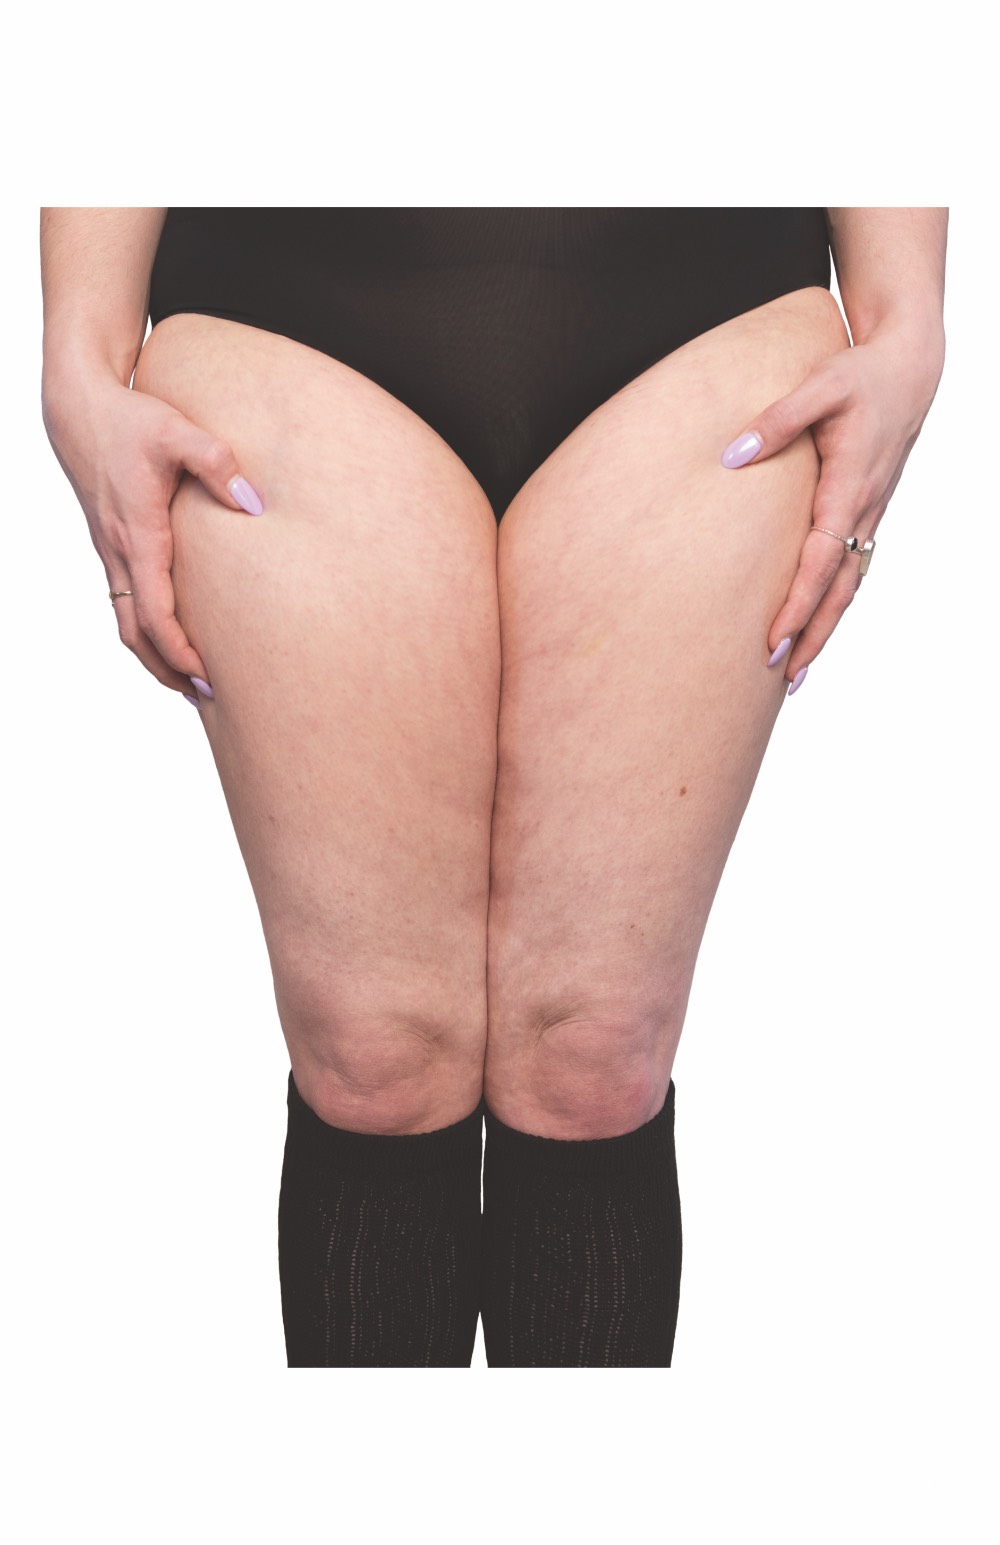 The thighs of a woman wearing black underwear and black socks